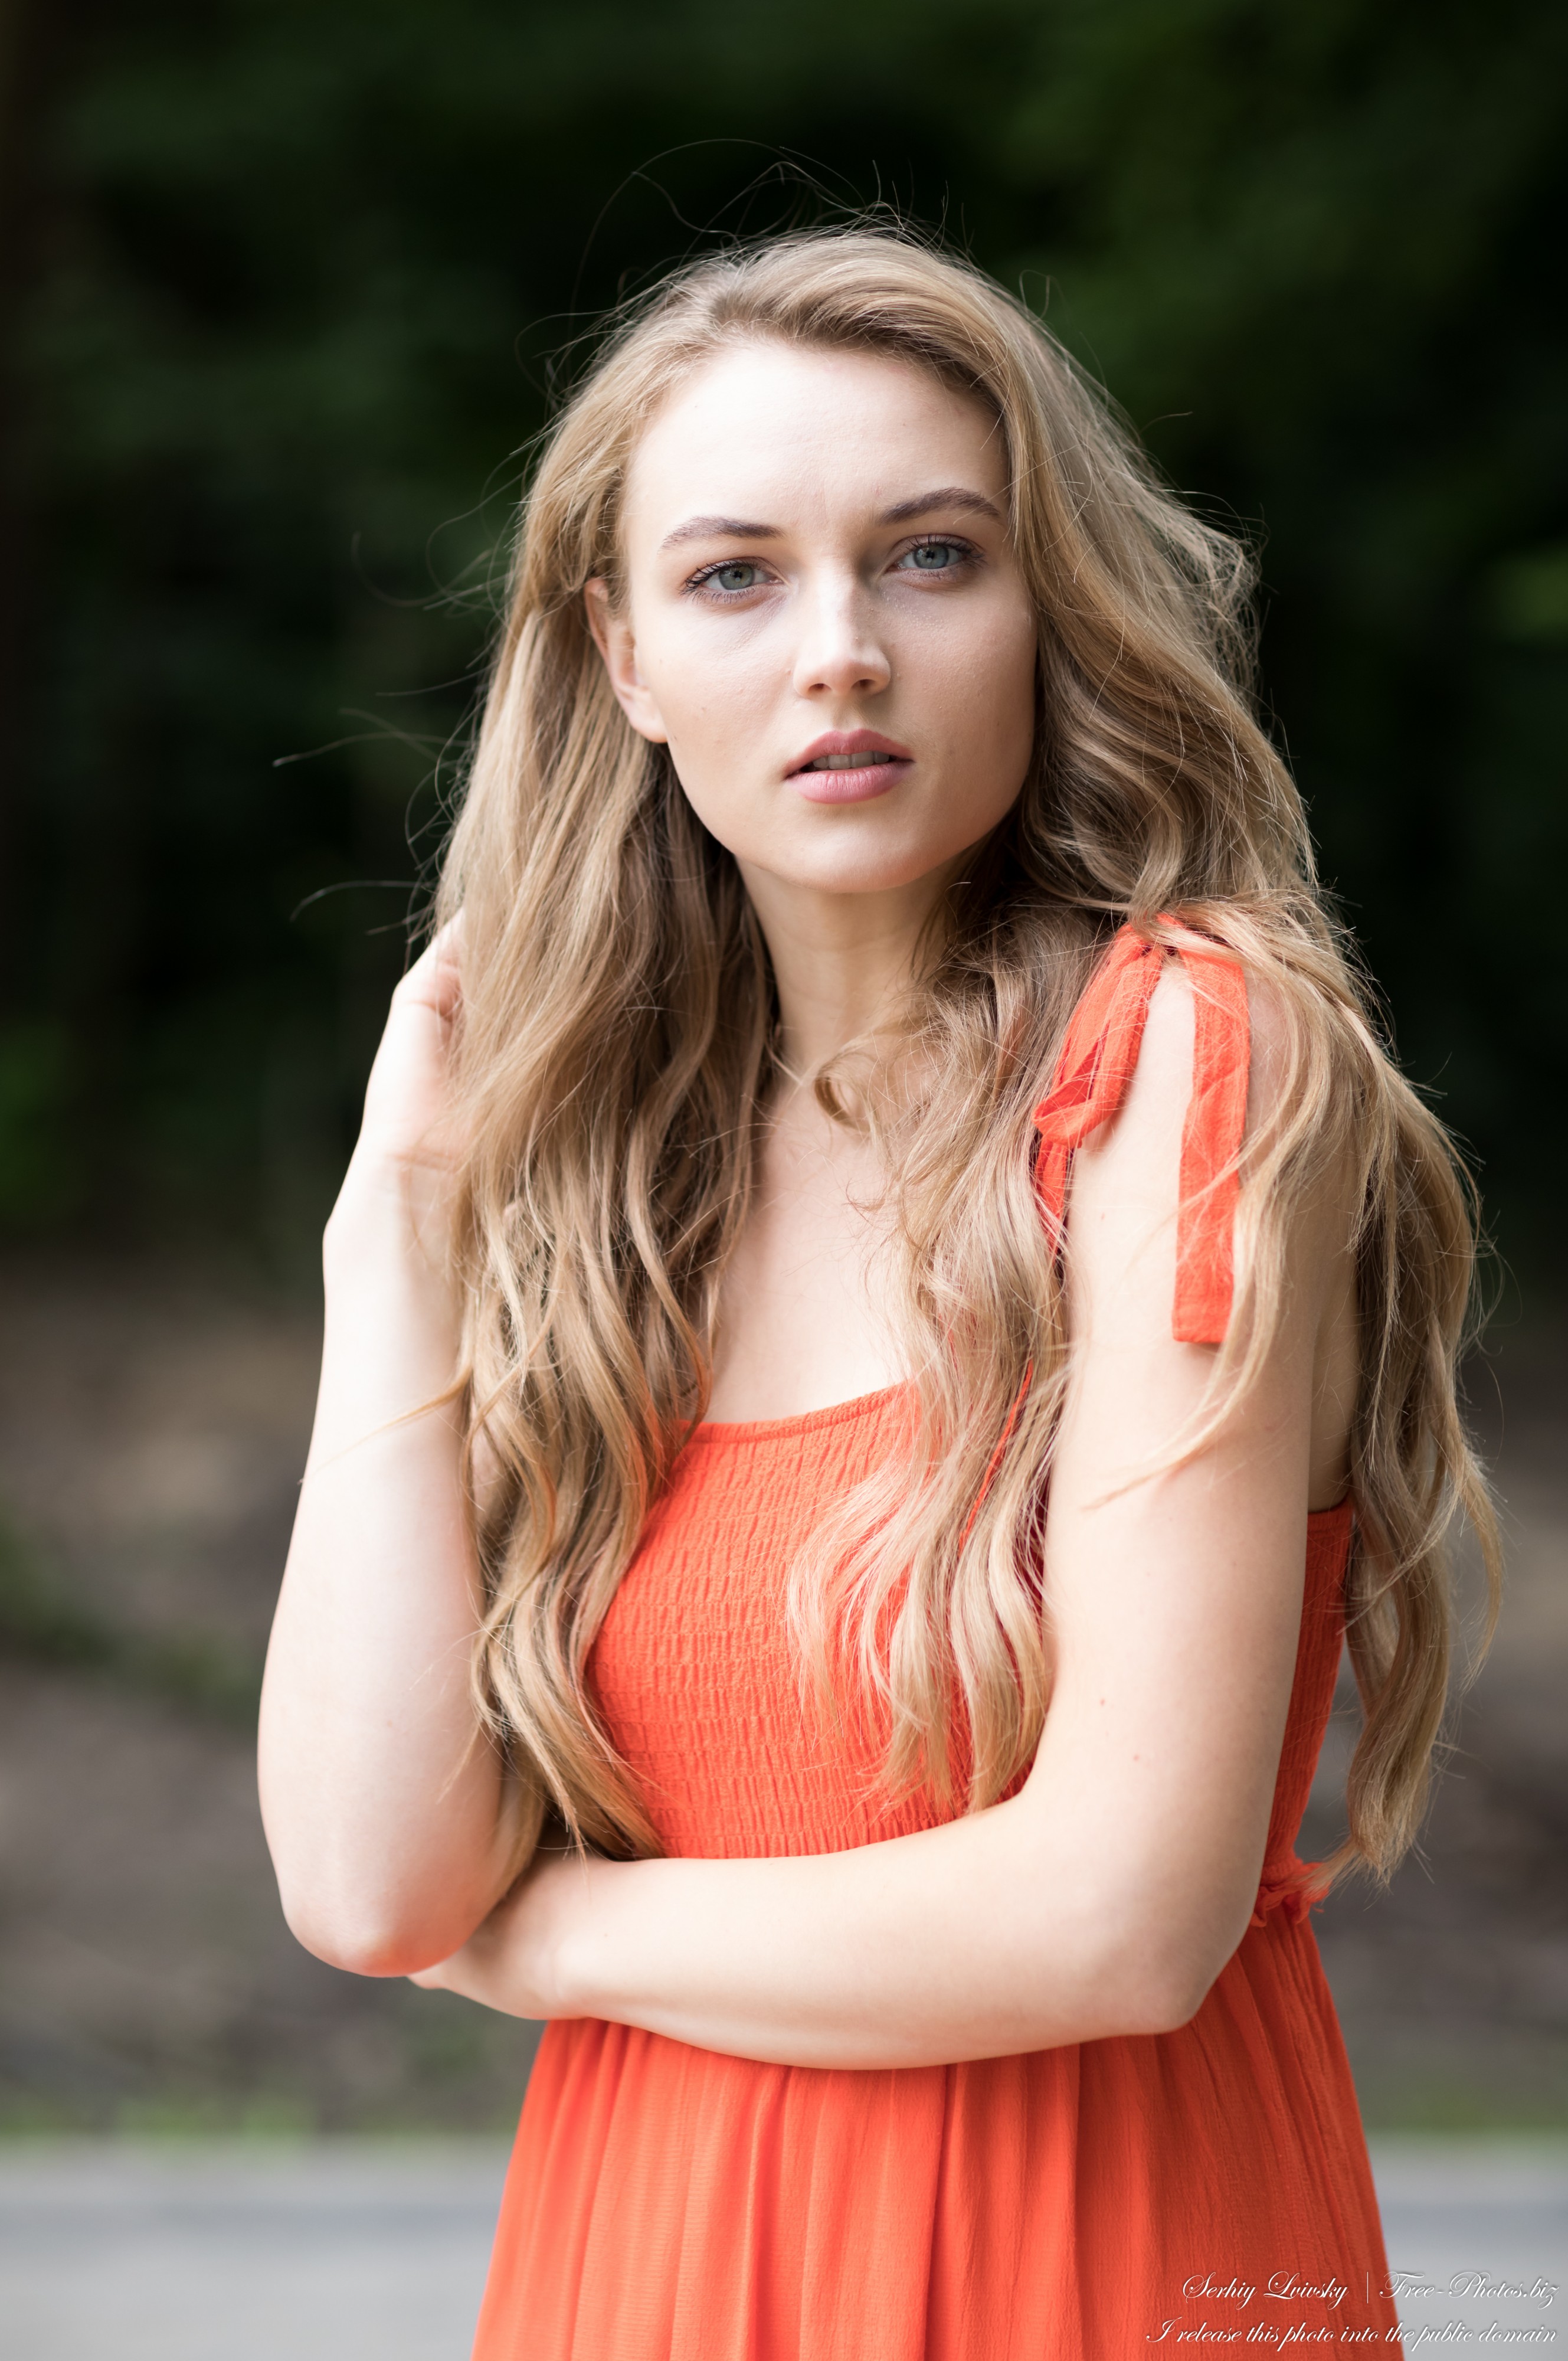 Photo Of Yaryna A 22 Year Old Natural Blonde Catholic Girl